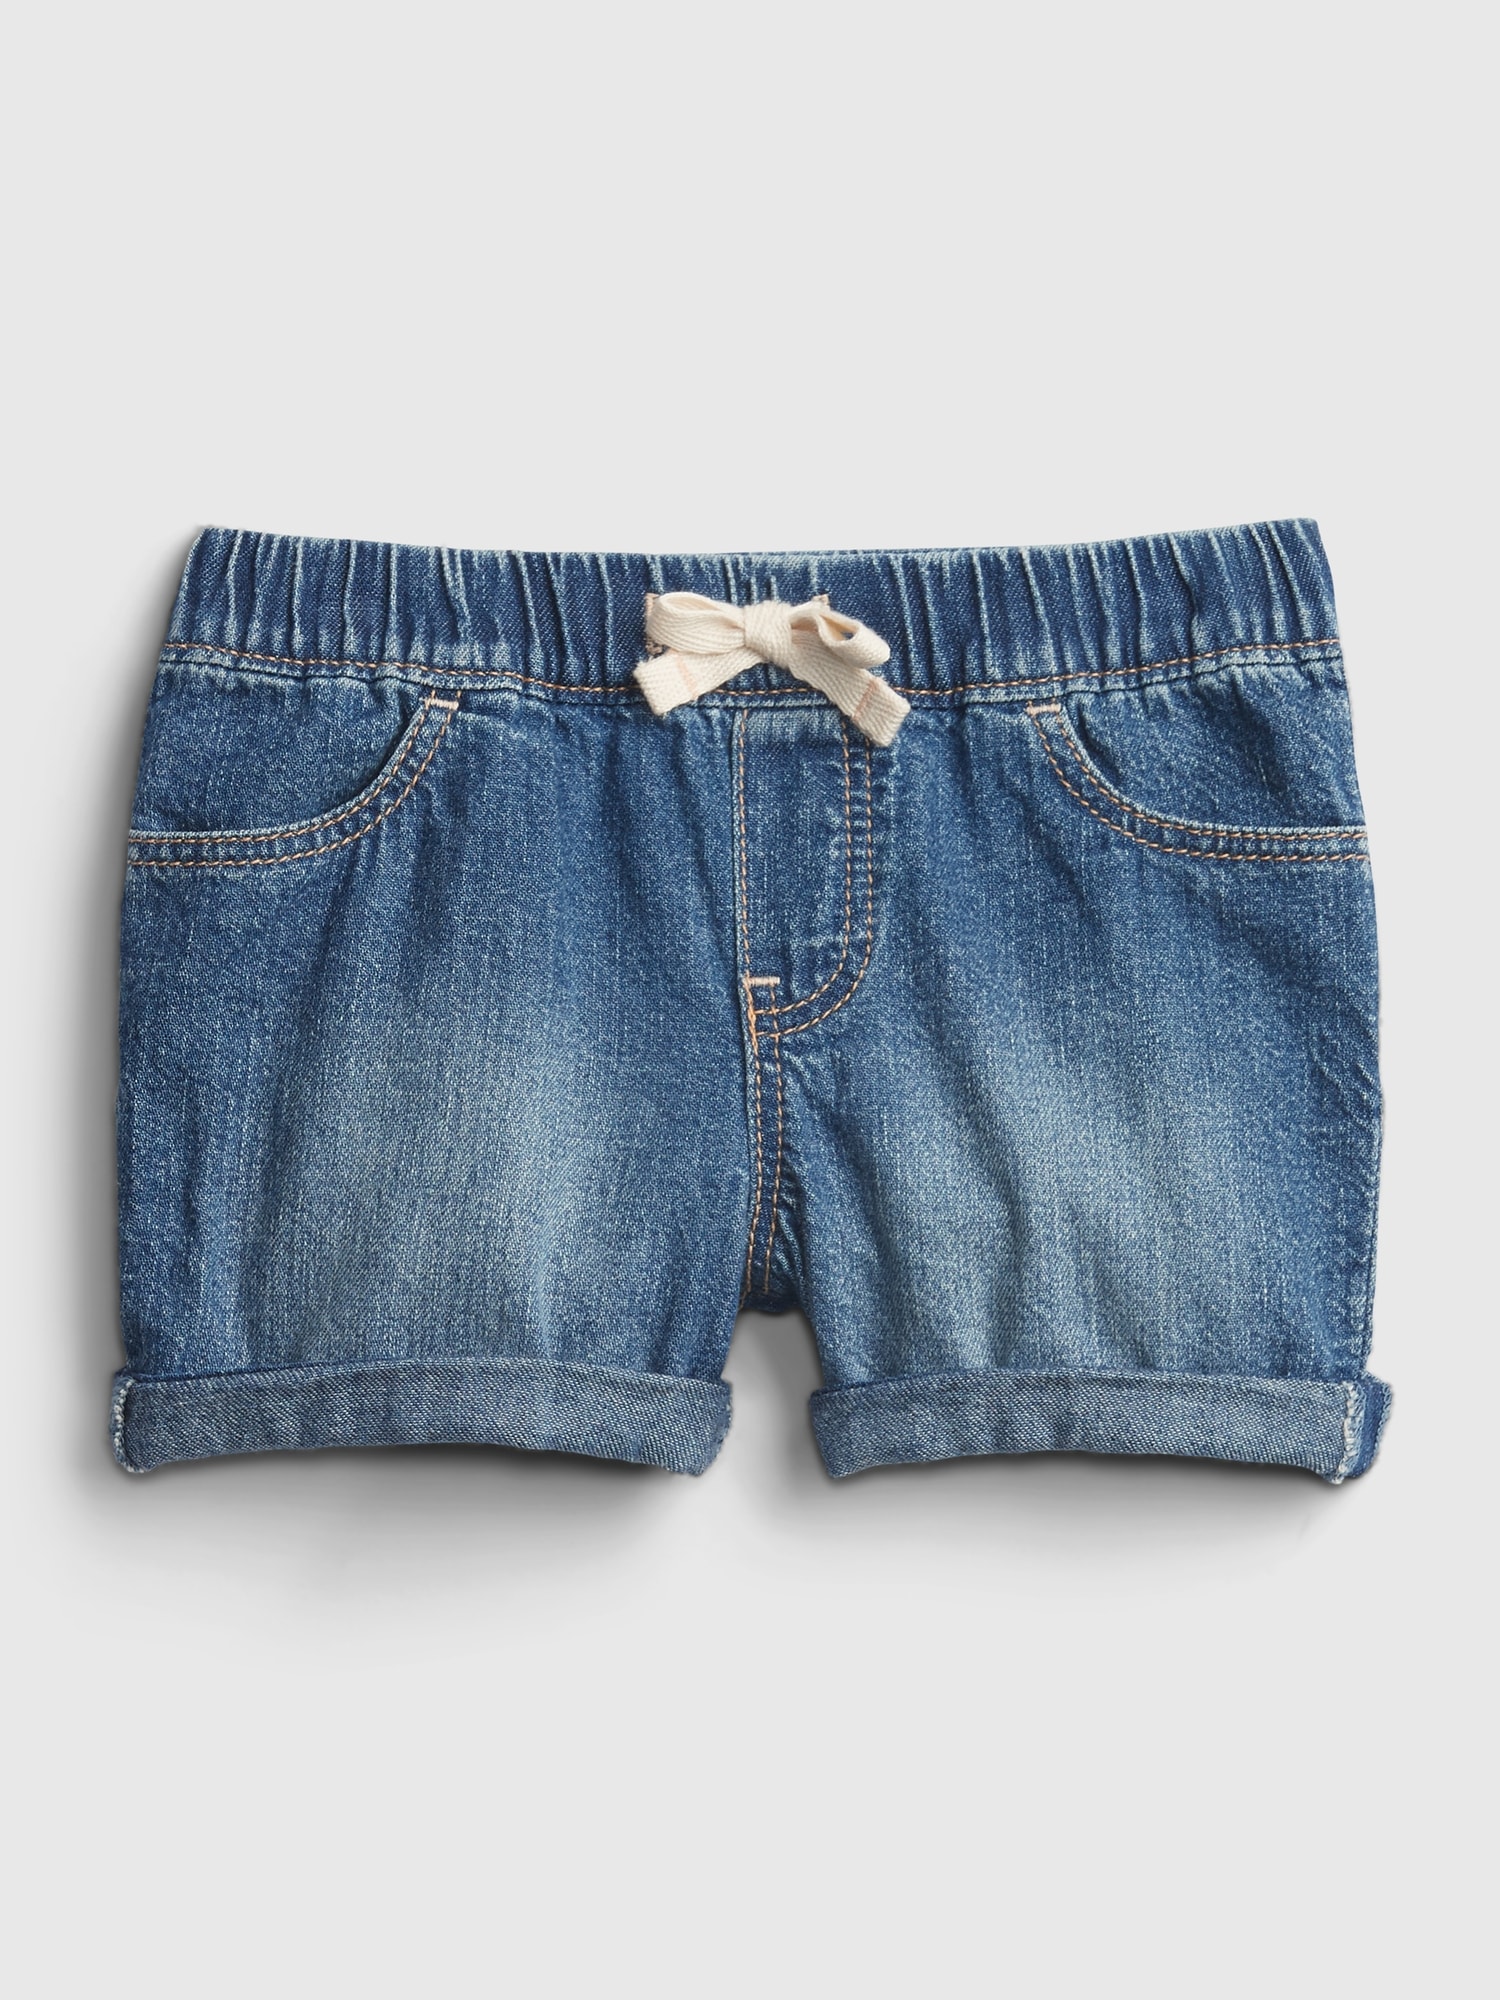 Toddler Denim Pull-On Shorts with Washwell™ | Gap